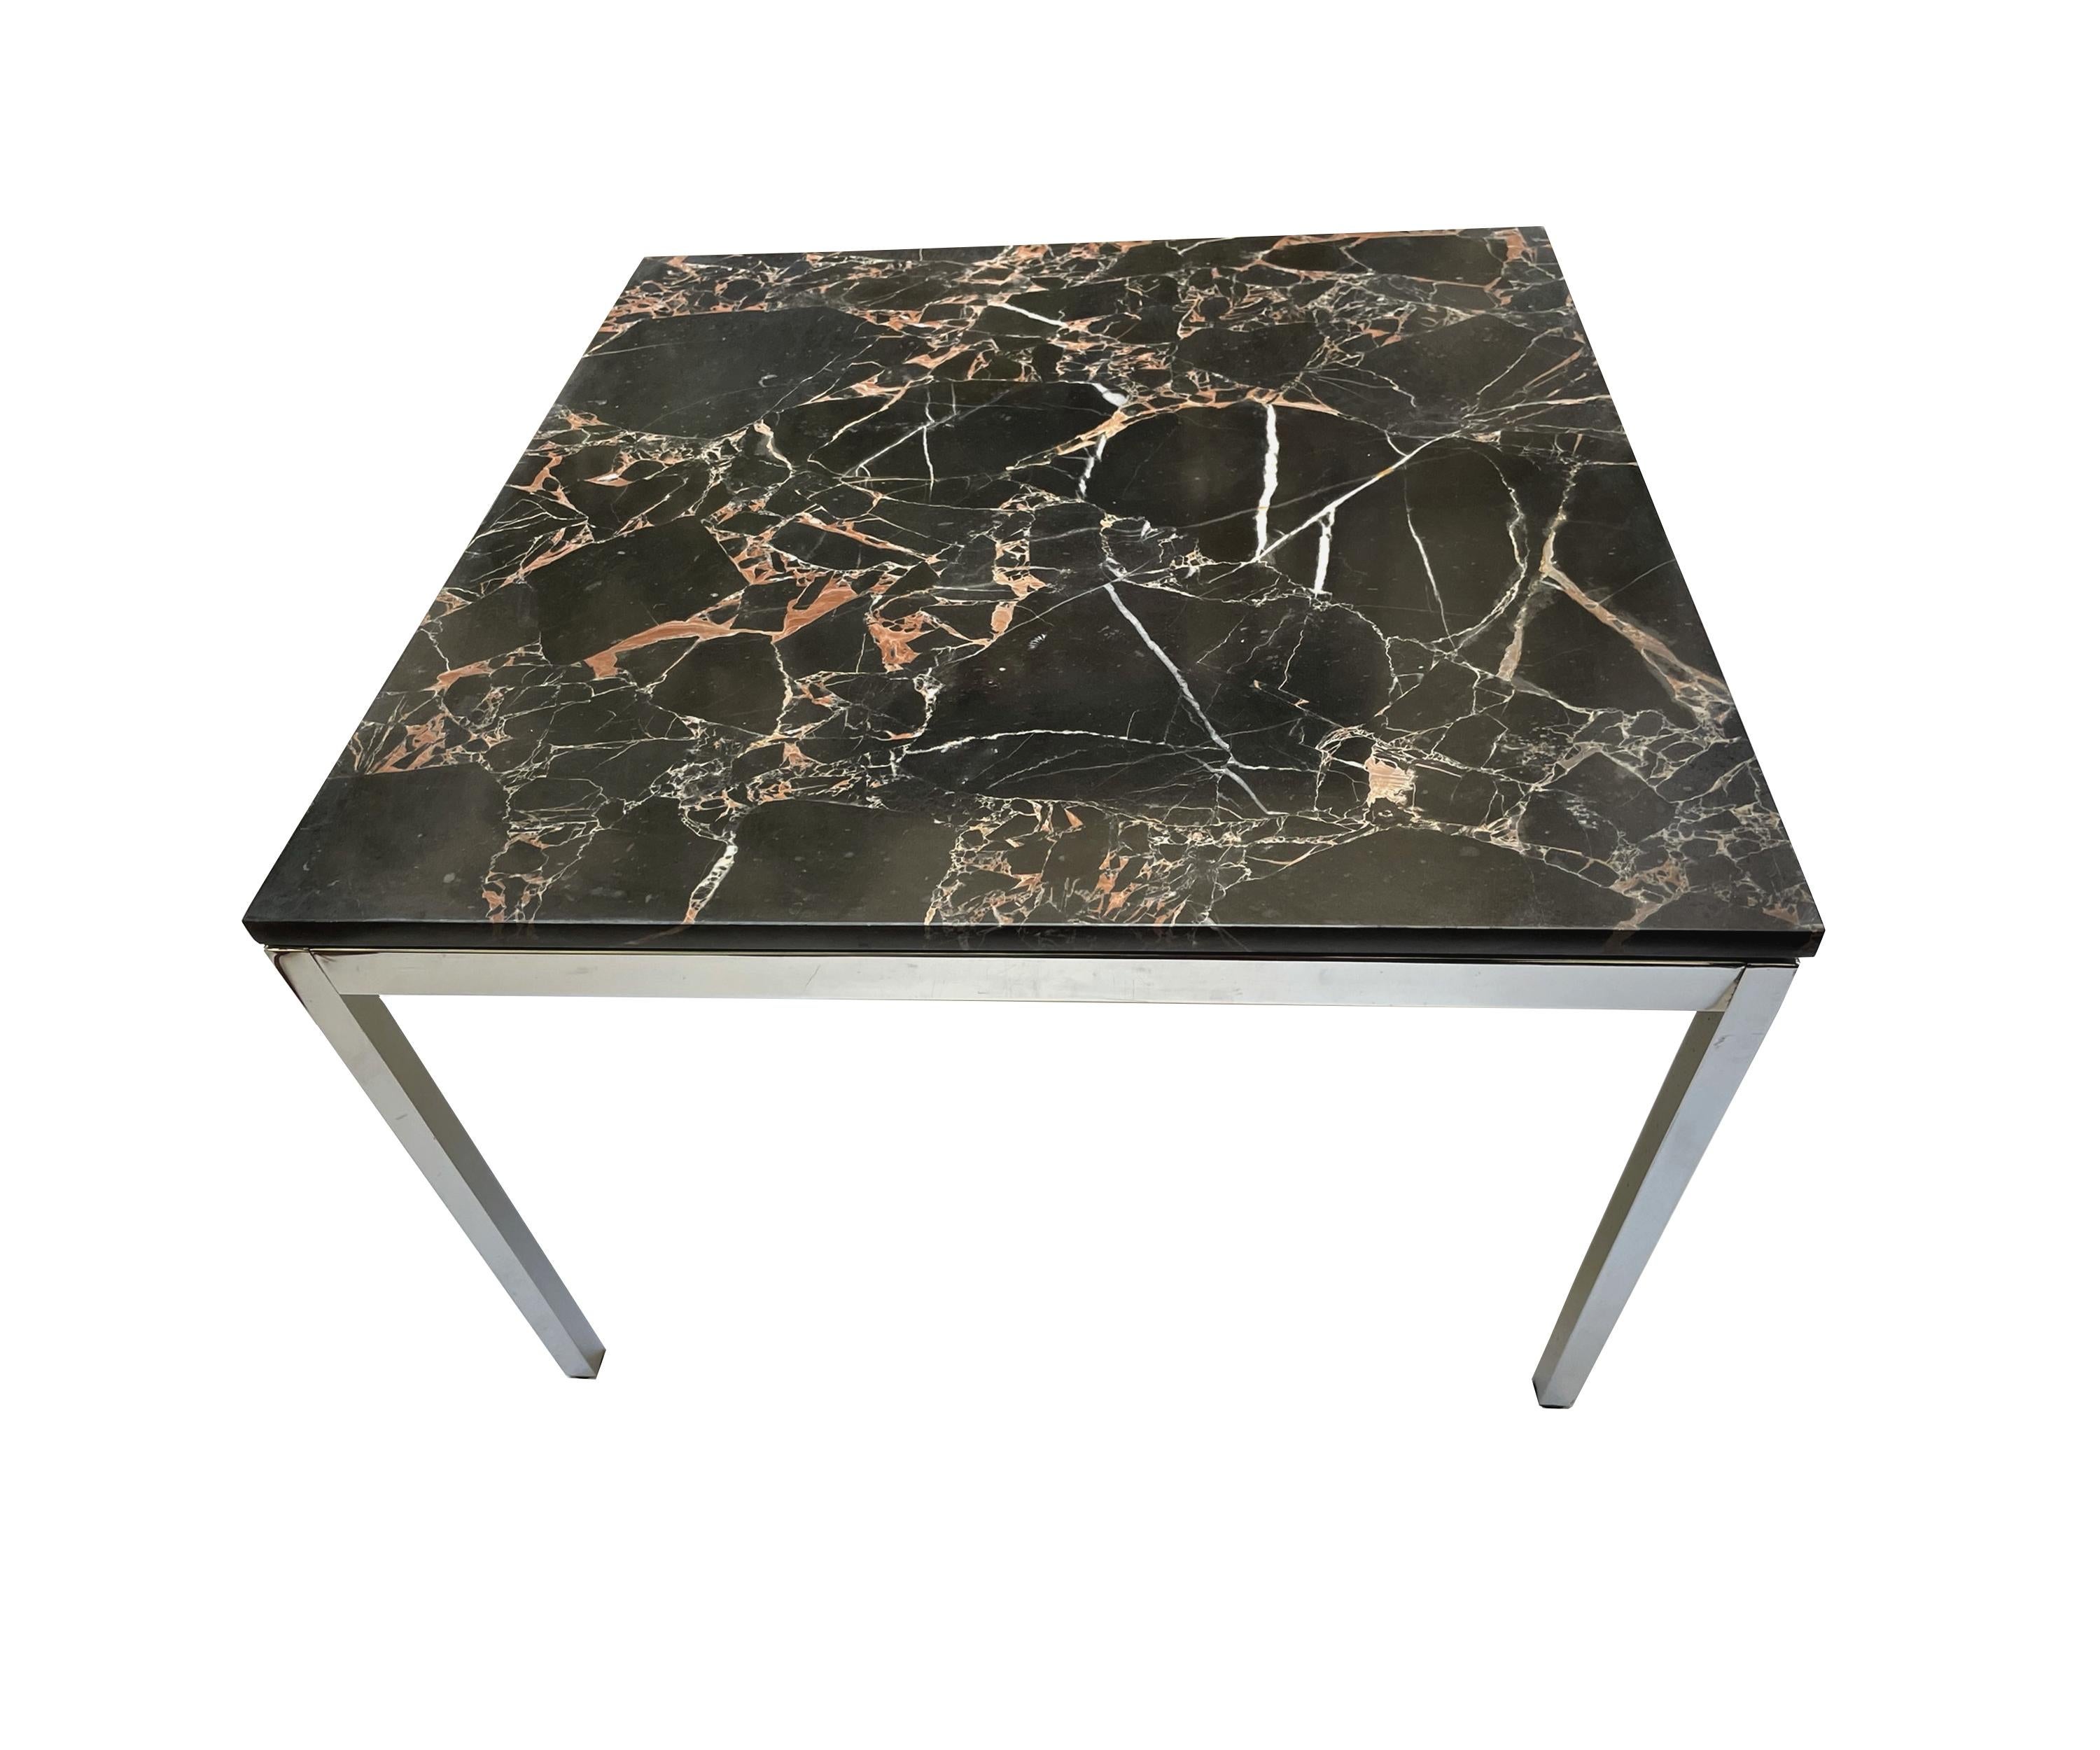 Pair of original end tables, Florence Knoll for Knoll International, circa 170.
Bases in chromed metal.
Trays in Calacatta black marble.
In very good condition.